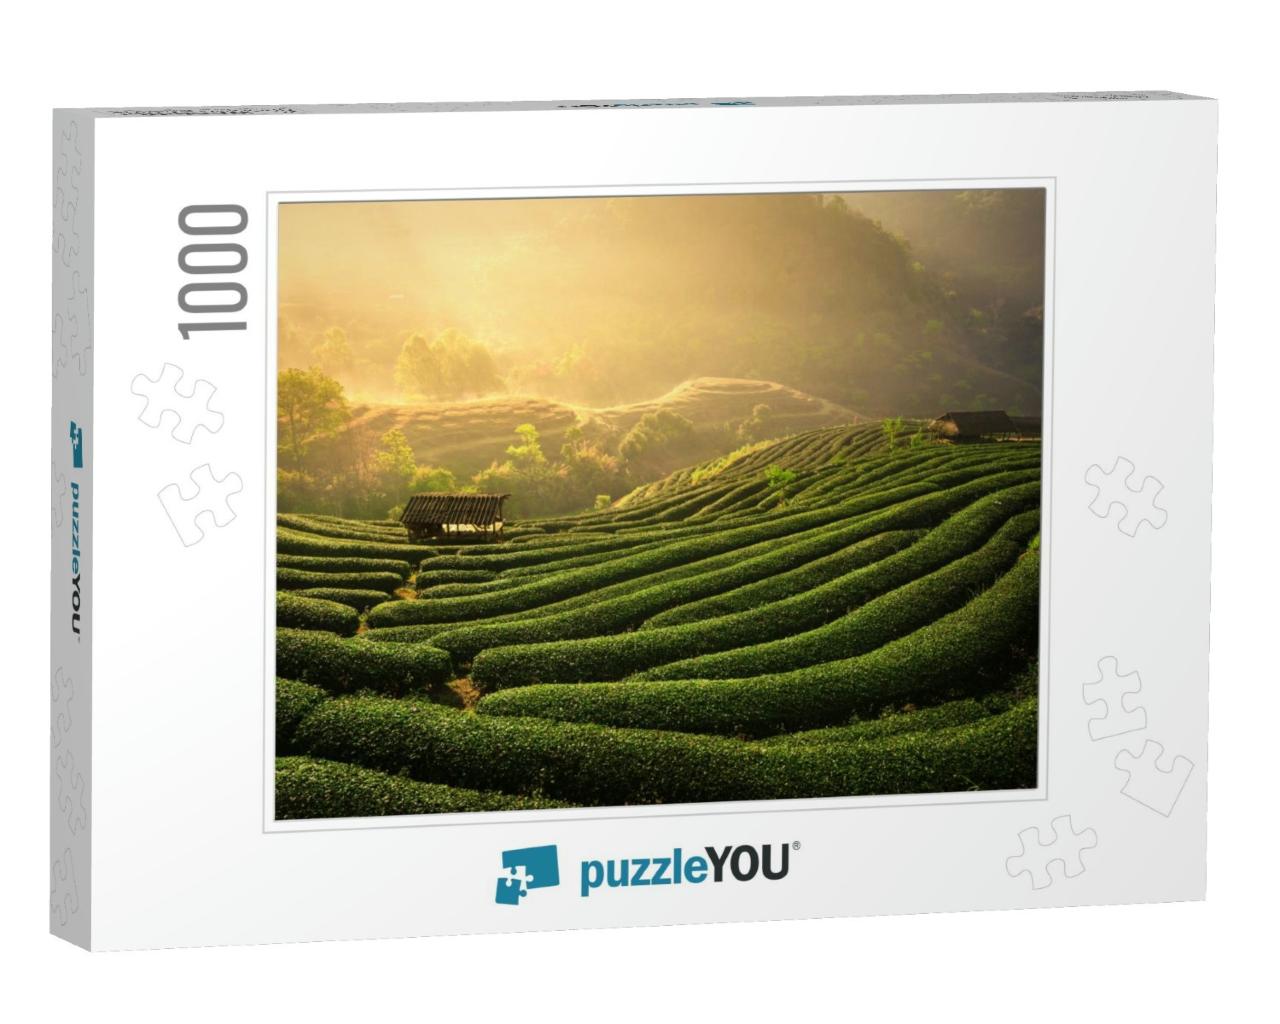 The Tea Plantations Background, Tea Plantations in Mornin... Jigsaw Puzzle with 1000 pieces